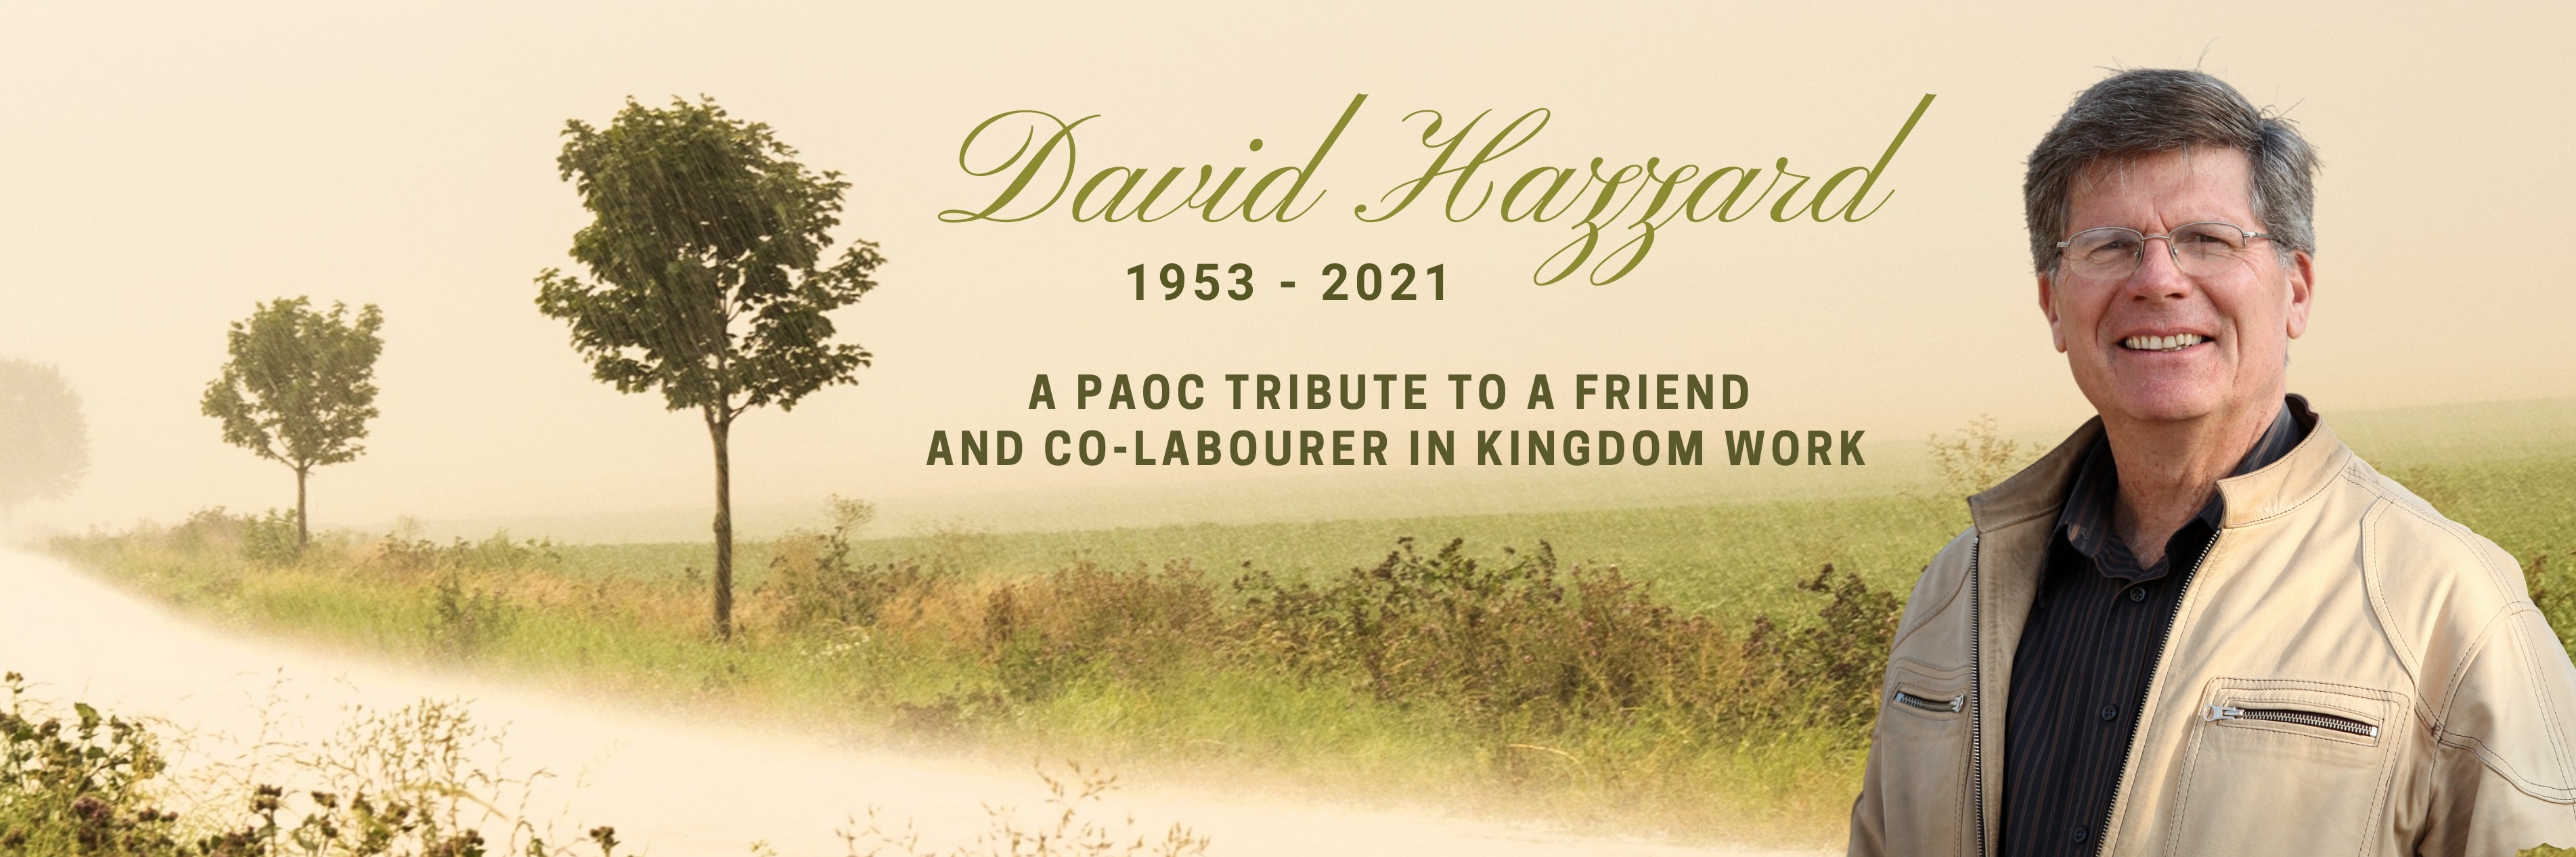 1 - Hero Banner for paoc.org - David Hazzard - Home with Jesus - post on May 28, 2021